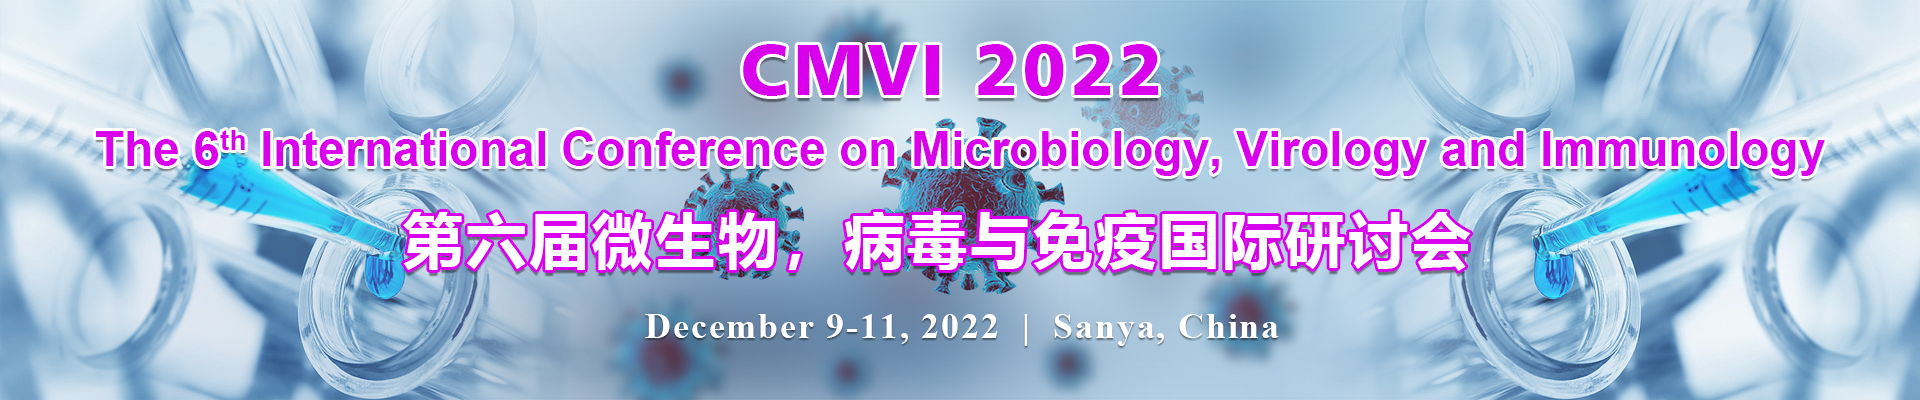 The 6th International Conference on Microbiology, Virology and Immunology (CMVI 2022), Online Event